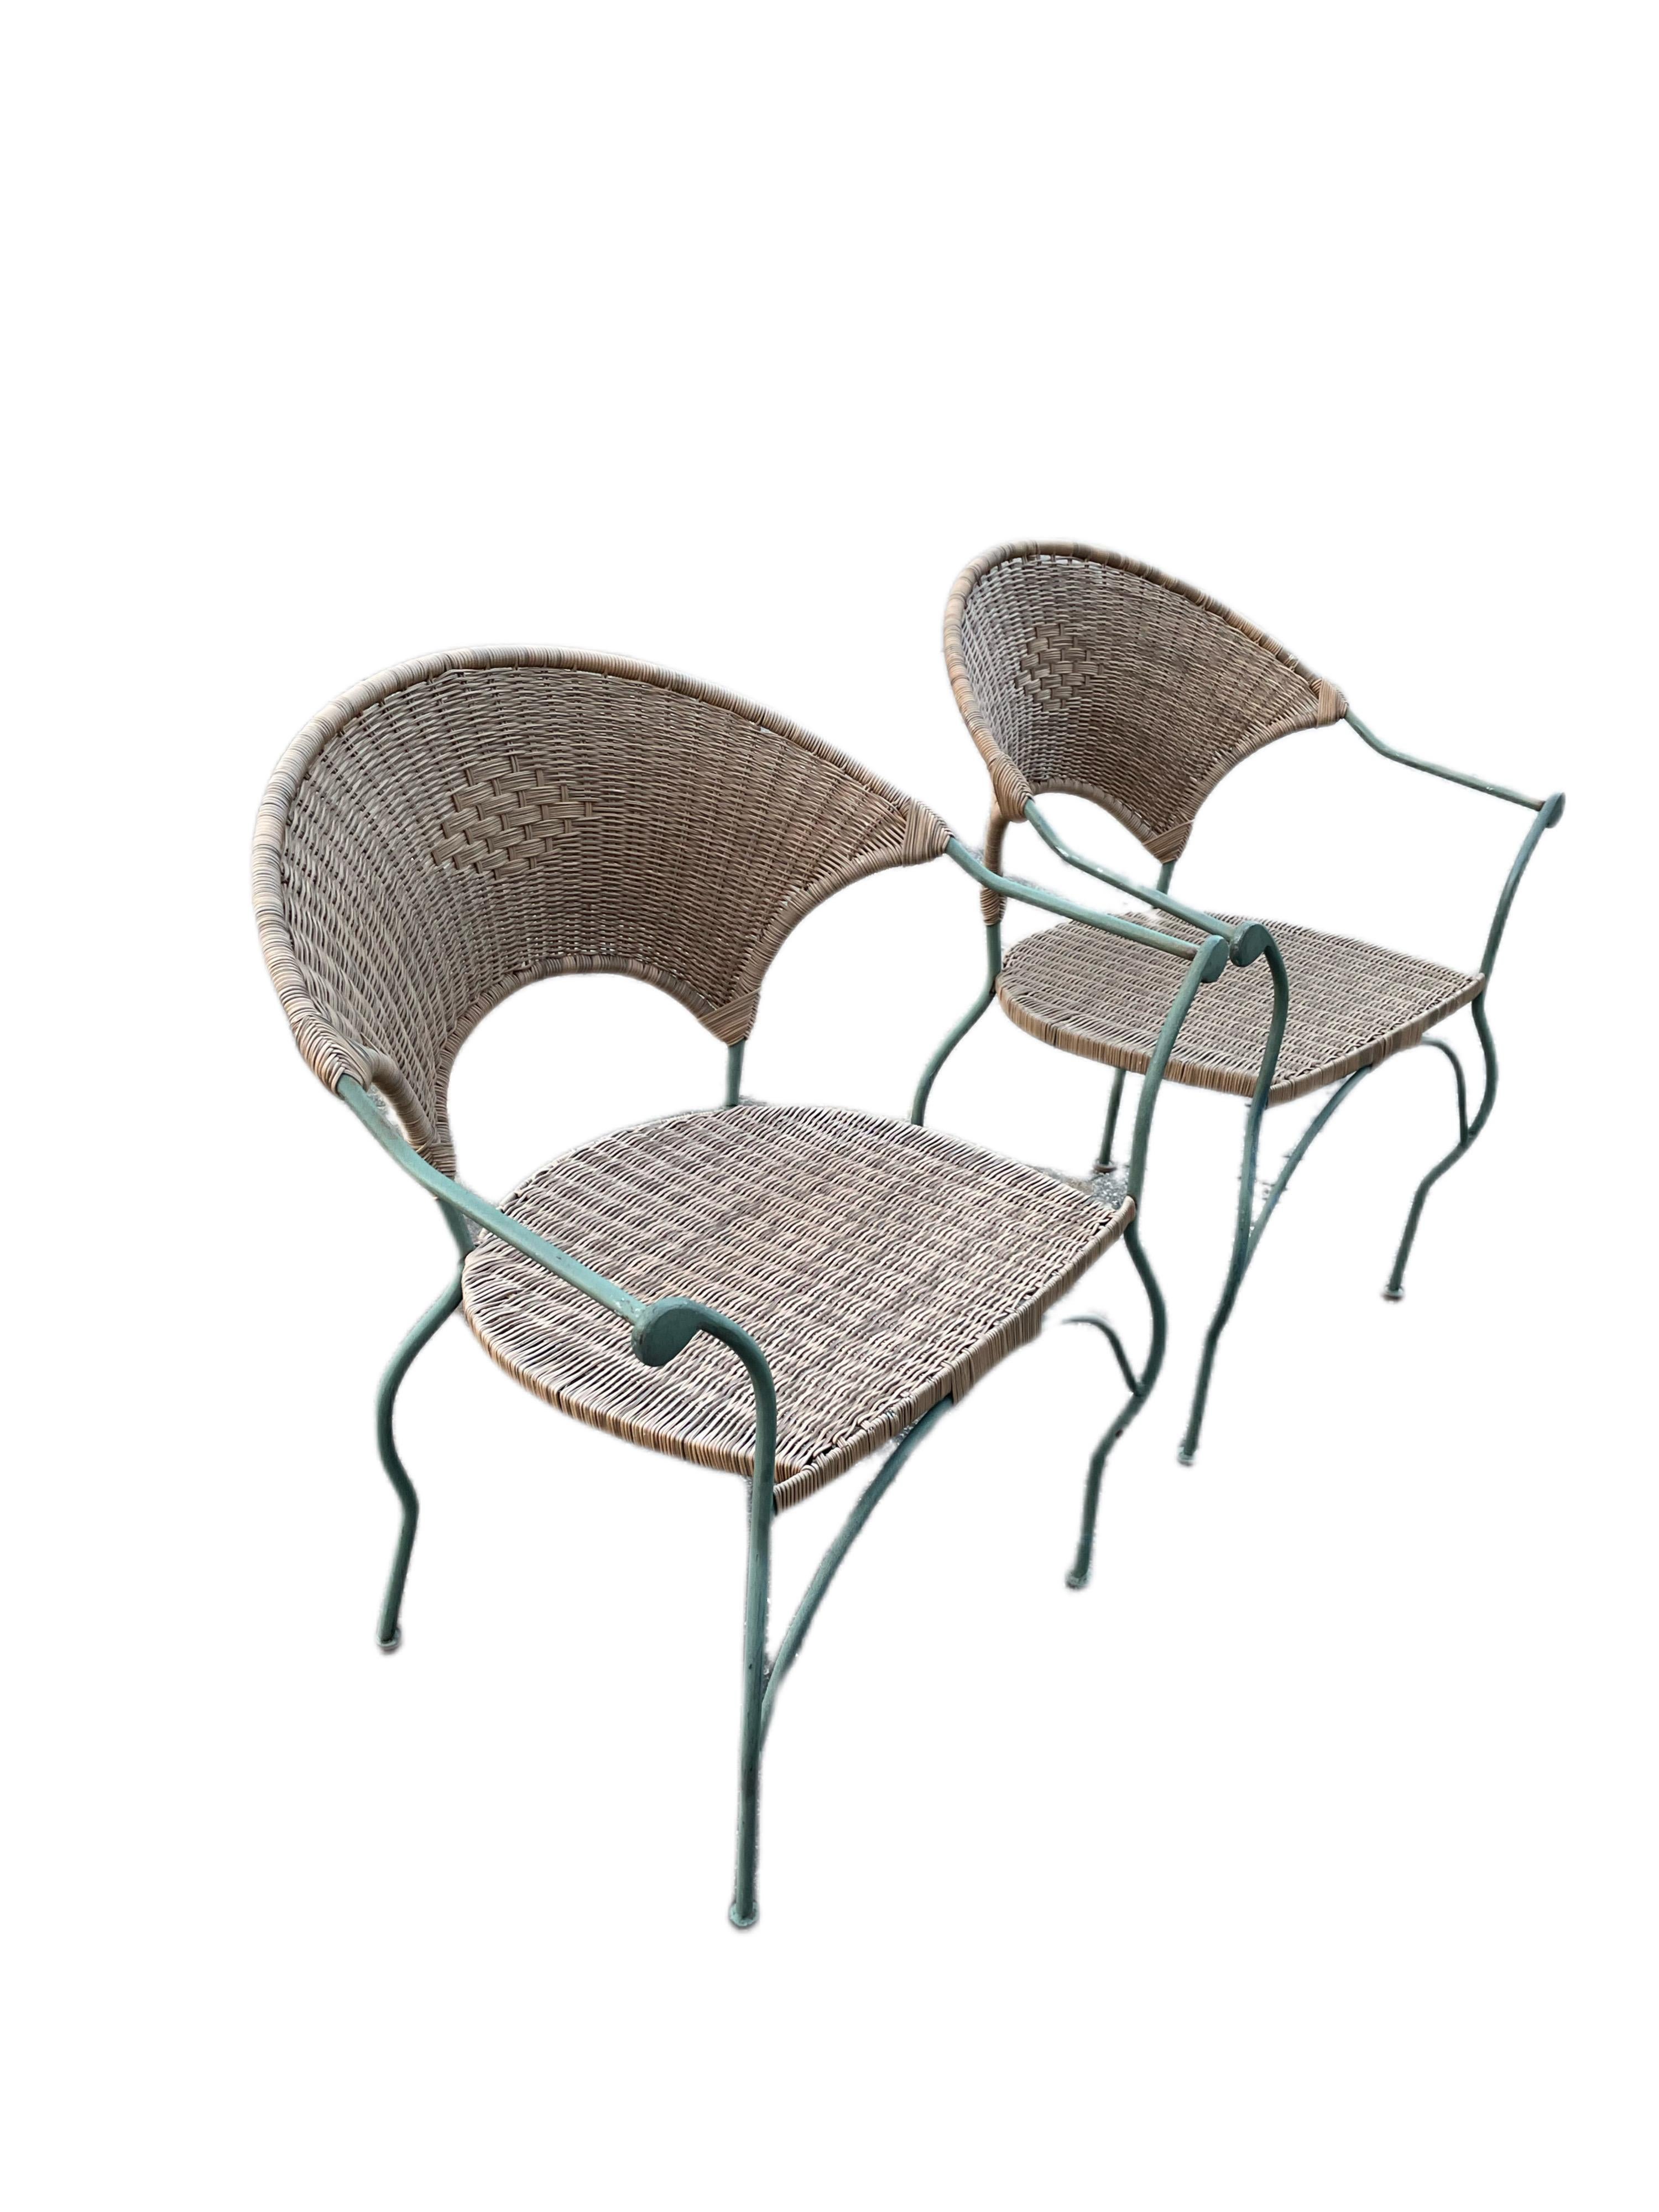 Wicker and Iron Bistro Set

3 Piece Set

Glass Topped Table w/umbrella hole

2 Curved back wicker and iron arm chairs

In stock and ready to ship for your convenience 

